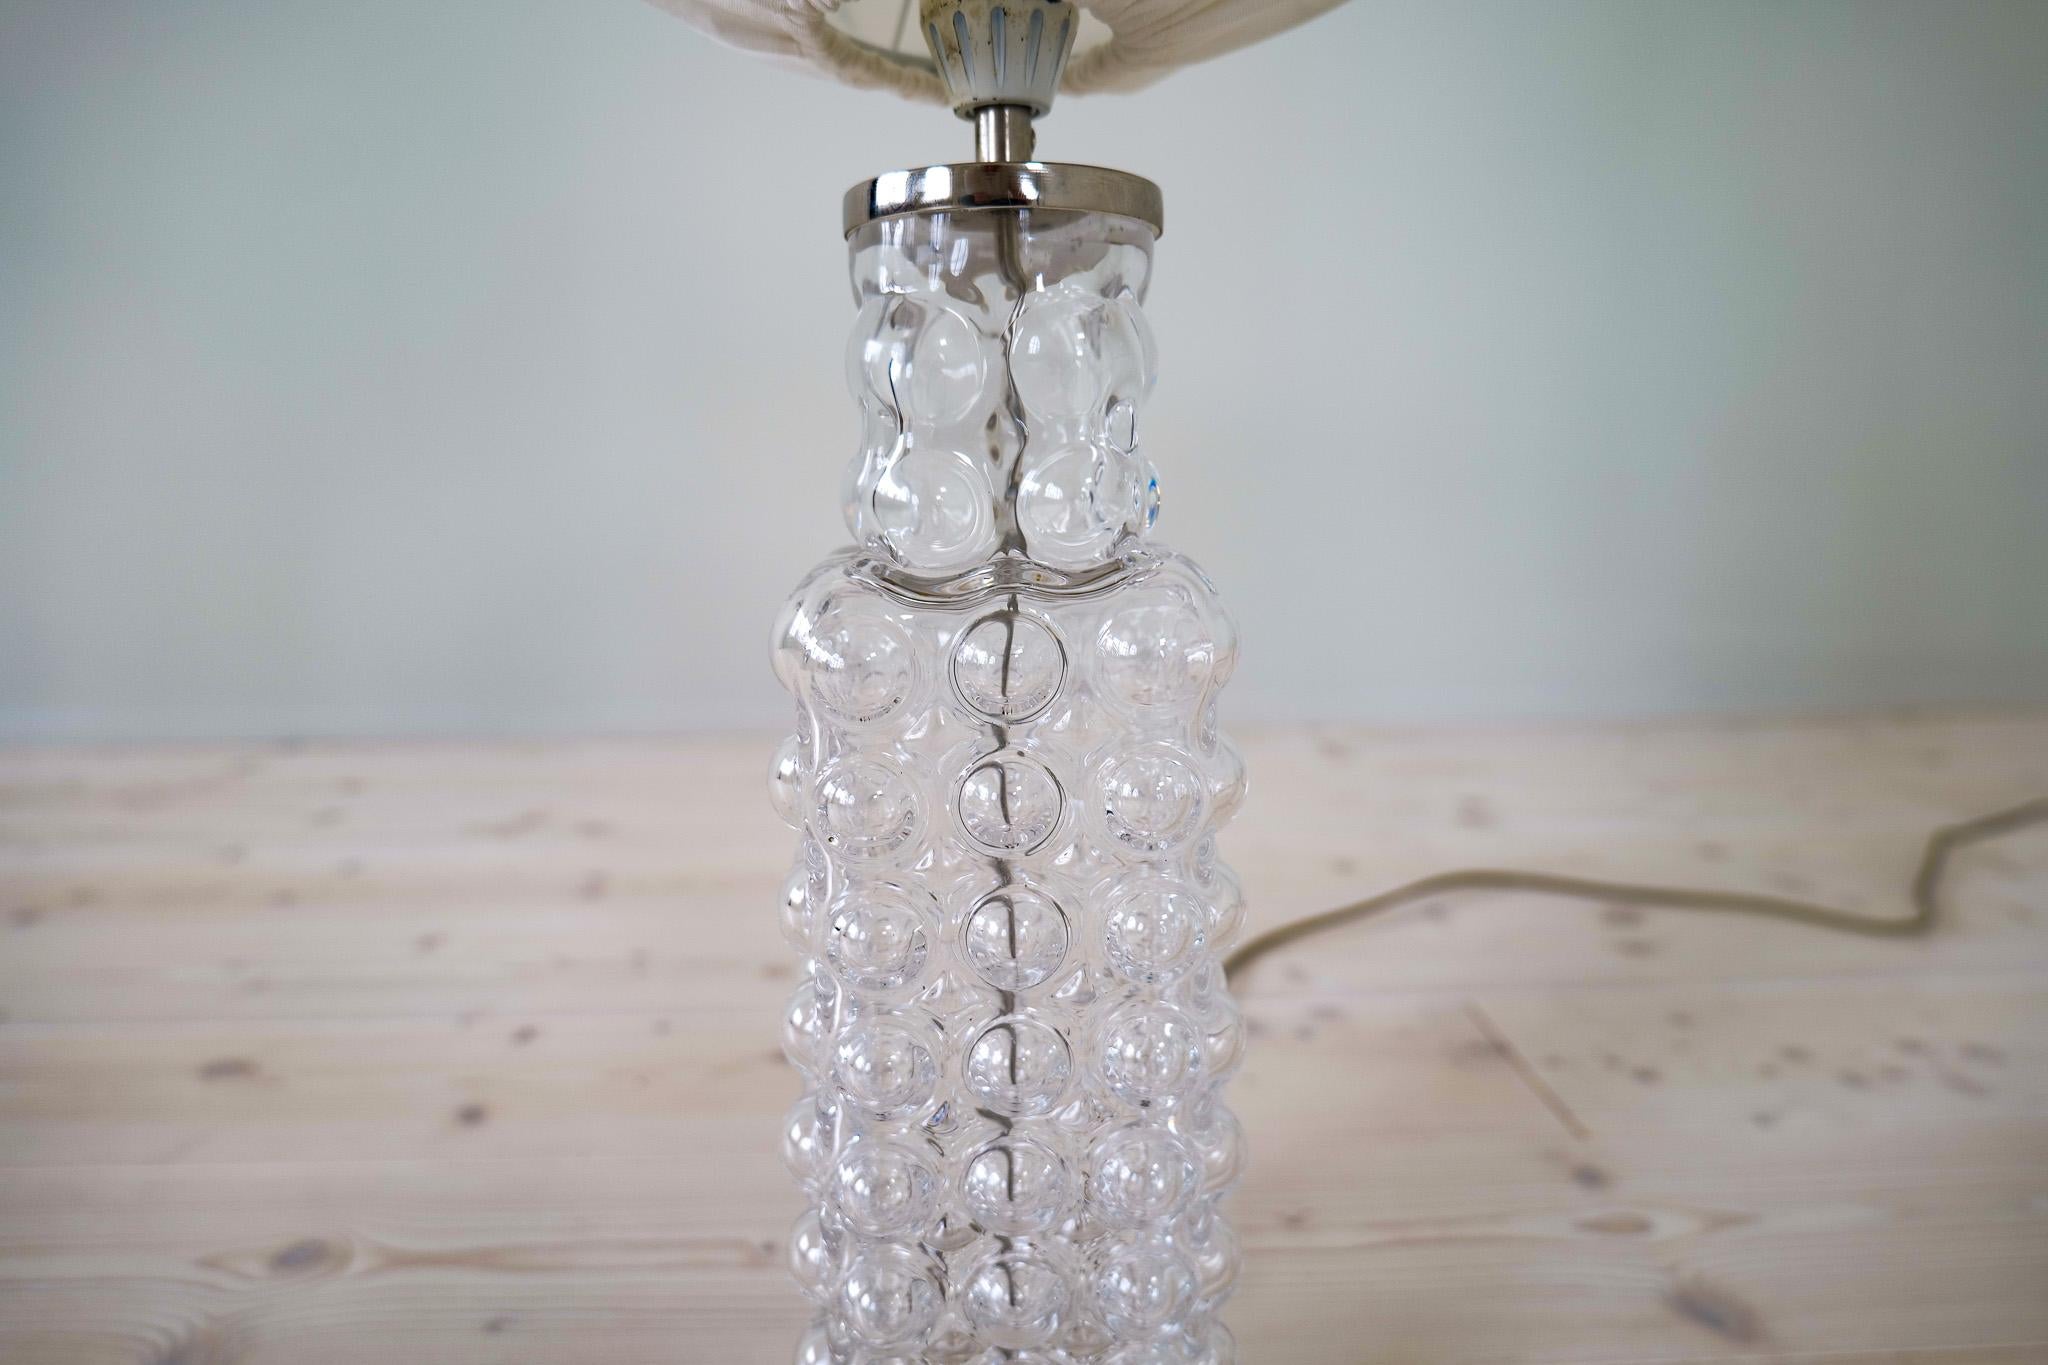 Mid-20th Century Midcentury Modern Drop Shaped Crystal Rare Table Lamp Orrefors by Carl Fagerlund For Sale